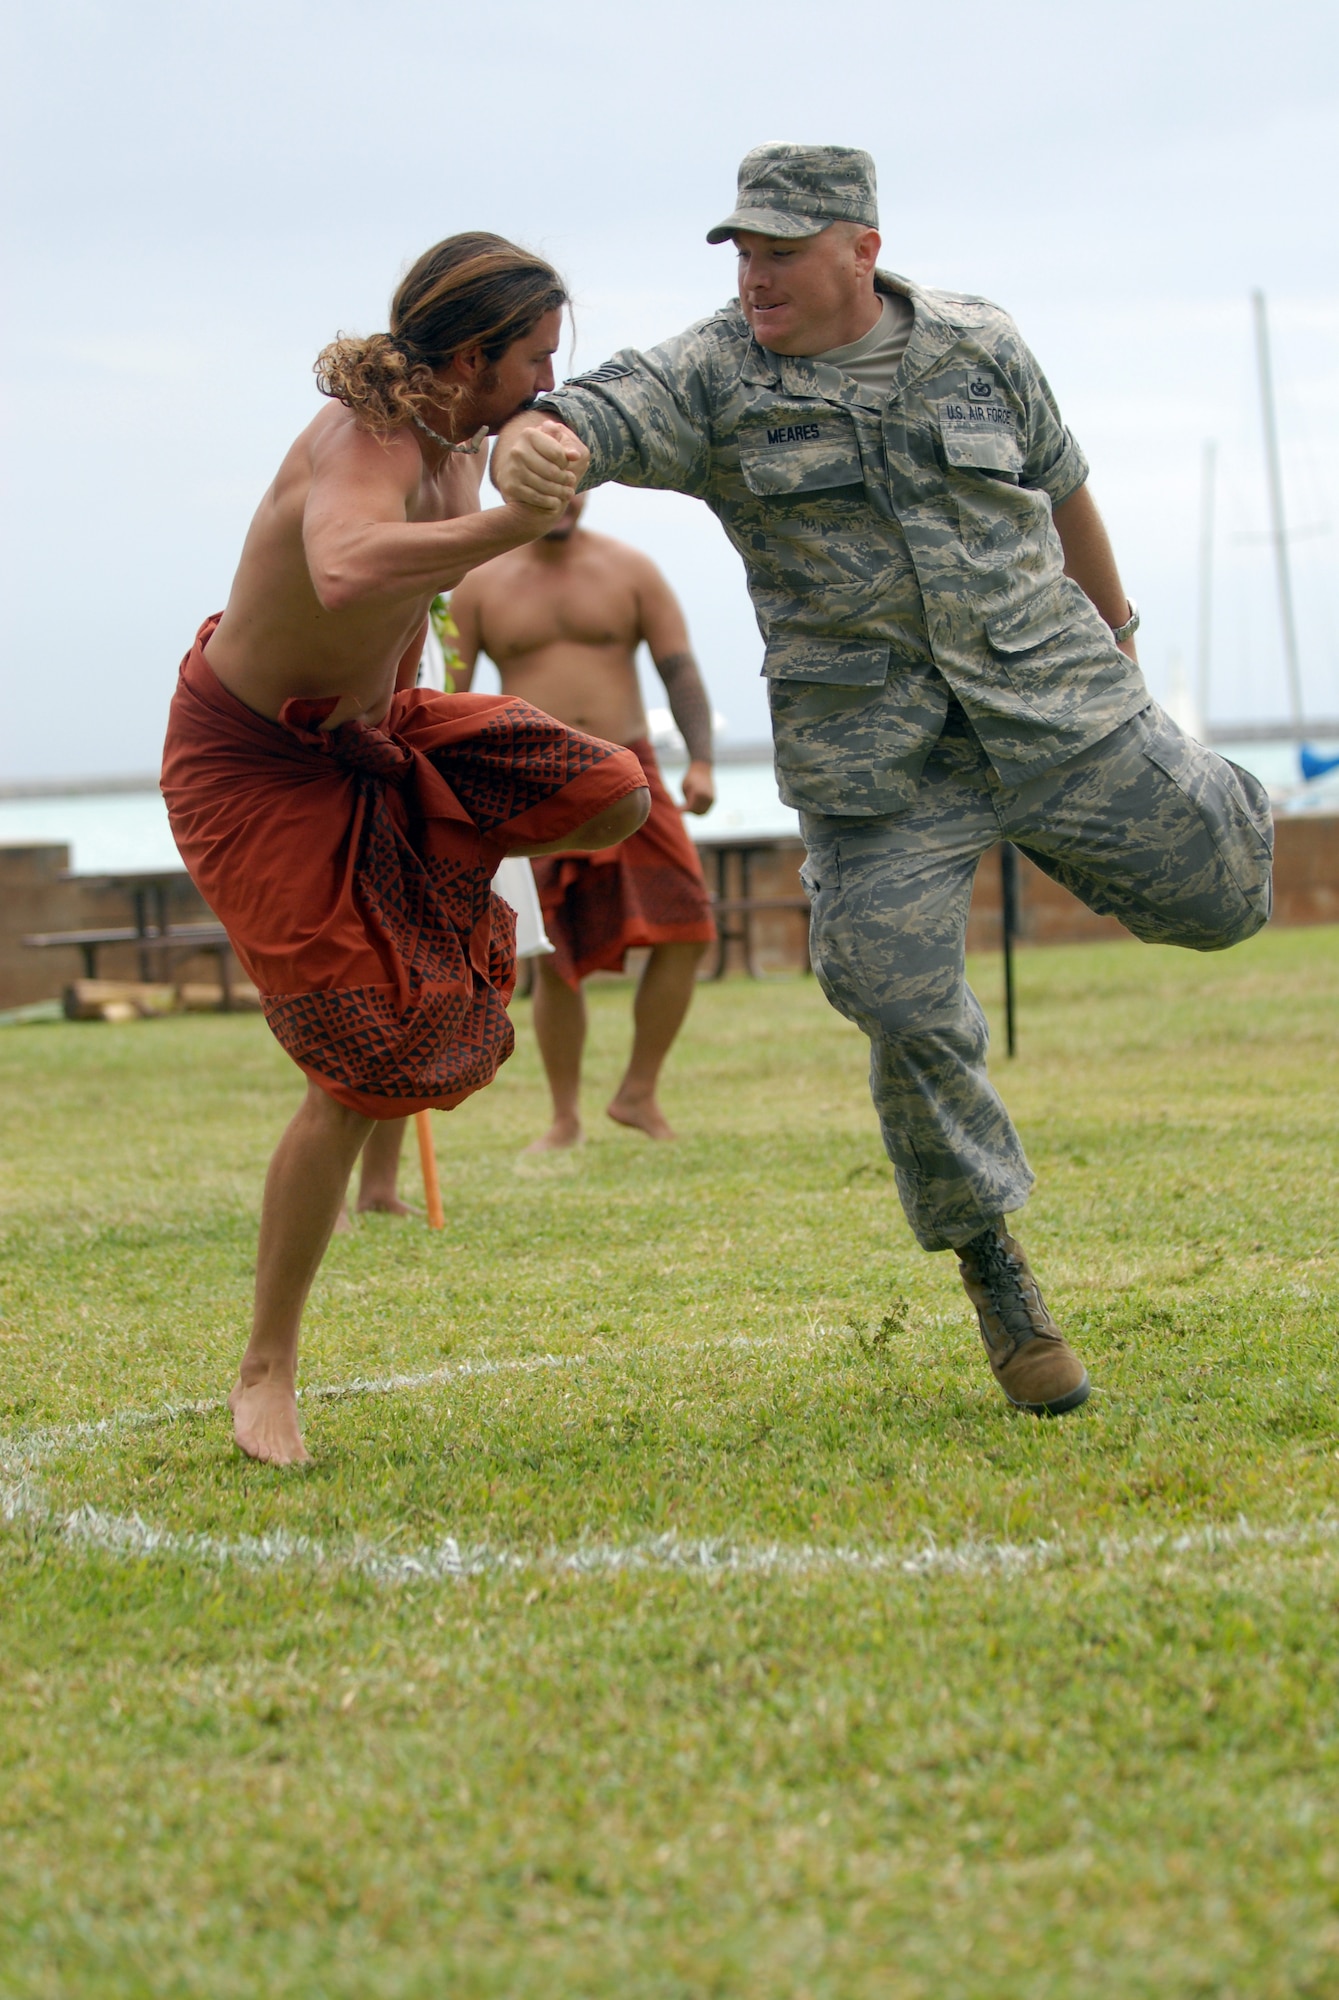 HICKAM AIR FORCE BASE, Hawaii -- Staff Sgt. Mike Meares, 15th Airlift Wing public affairs, competes in the Hakamoa (one legged wrestling) event against a local competitor during the Makahiki Festival here, Nov. 14. For more than two-thousand years, the significance of Lono and his contributions to the beliefs and practices of the early Hawaiian people, influenced the celebration of events held during the Makahiki Festival throughout the Hawaiian Islands. Since Lono was the embodiment of all the characteristics of peace and welfare, all warfare was strictly forbidden during the time of the Makahiki. Since Lono represented the spiritual life-force that came out of all agricultural efforts, much feasting of every kind was done during the four months of the Makahiki. This focus on health and welfare made games of skill that tested a healthy body and mind a focal point of the Makahiki games. (U.S. Air Force photo/Senior Airman Gustavo Gonzalez)